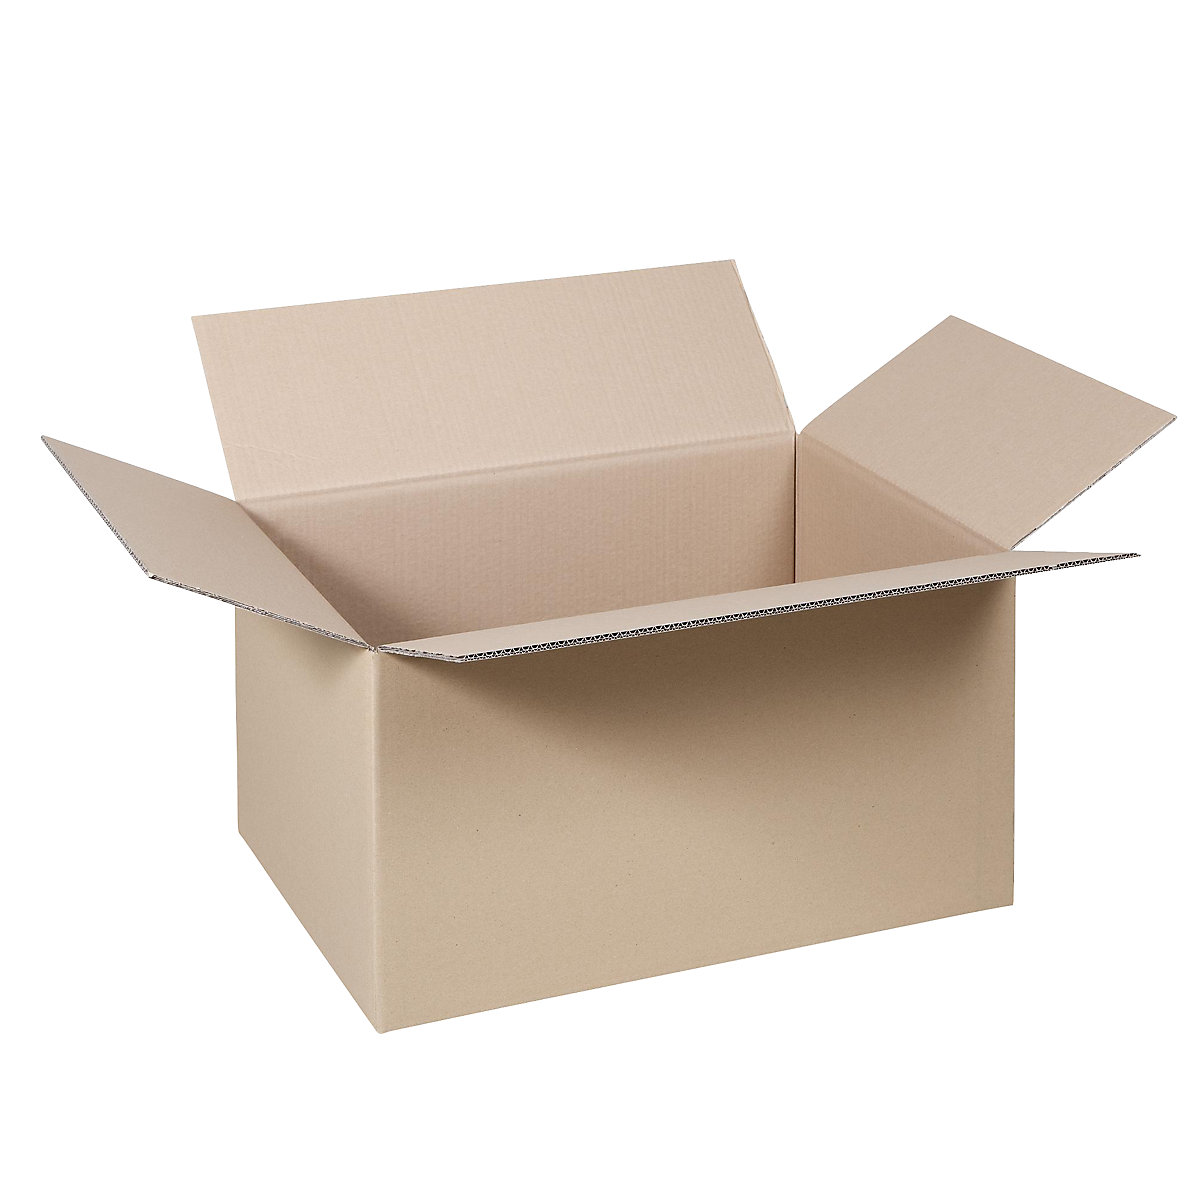 Folding cardboard box, FEFCO 0201, made of double fluted cardboard, internal dimensions 410 x 320 x 240 mm, pack of 50-31